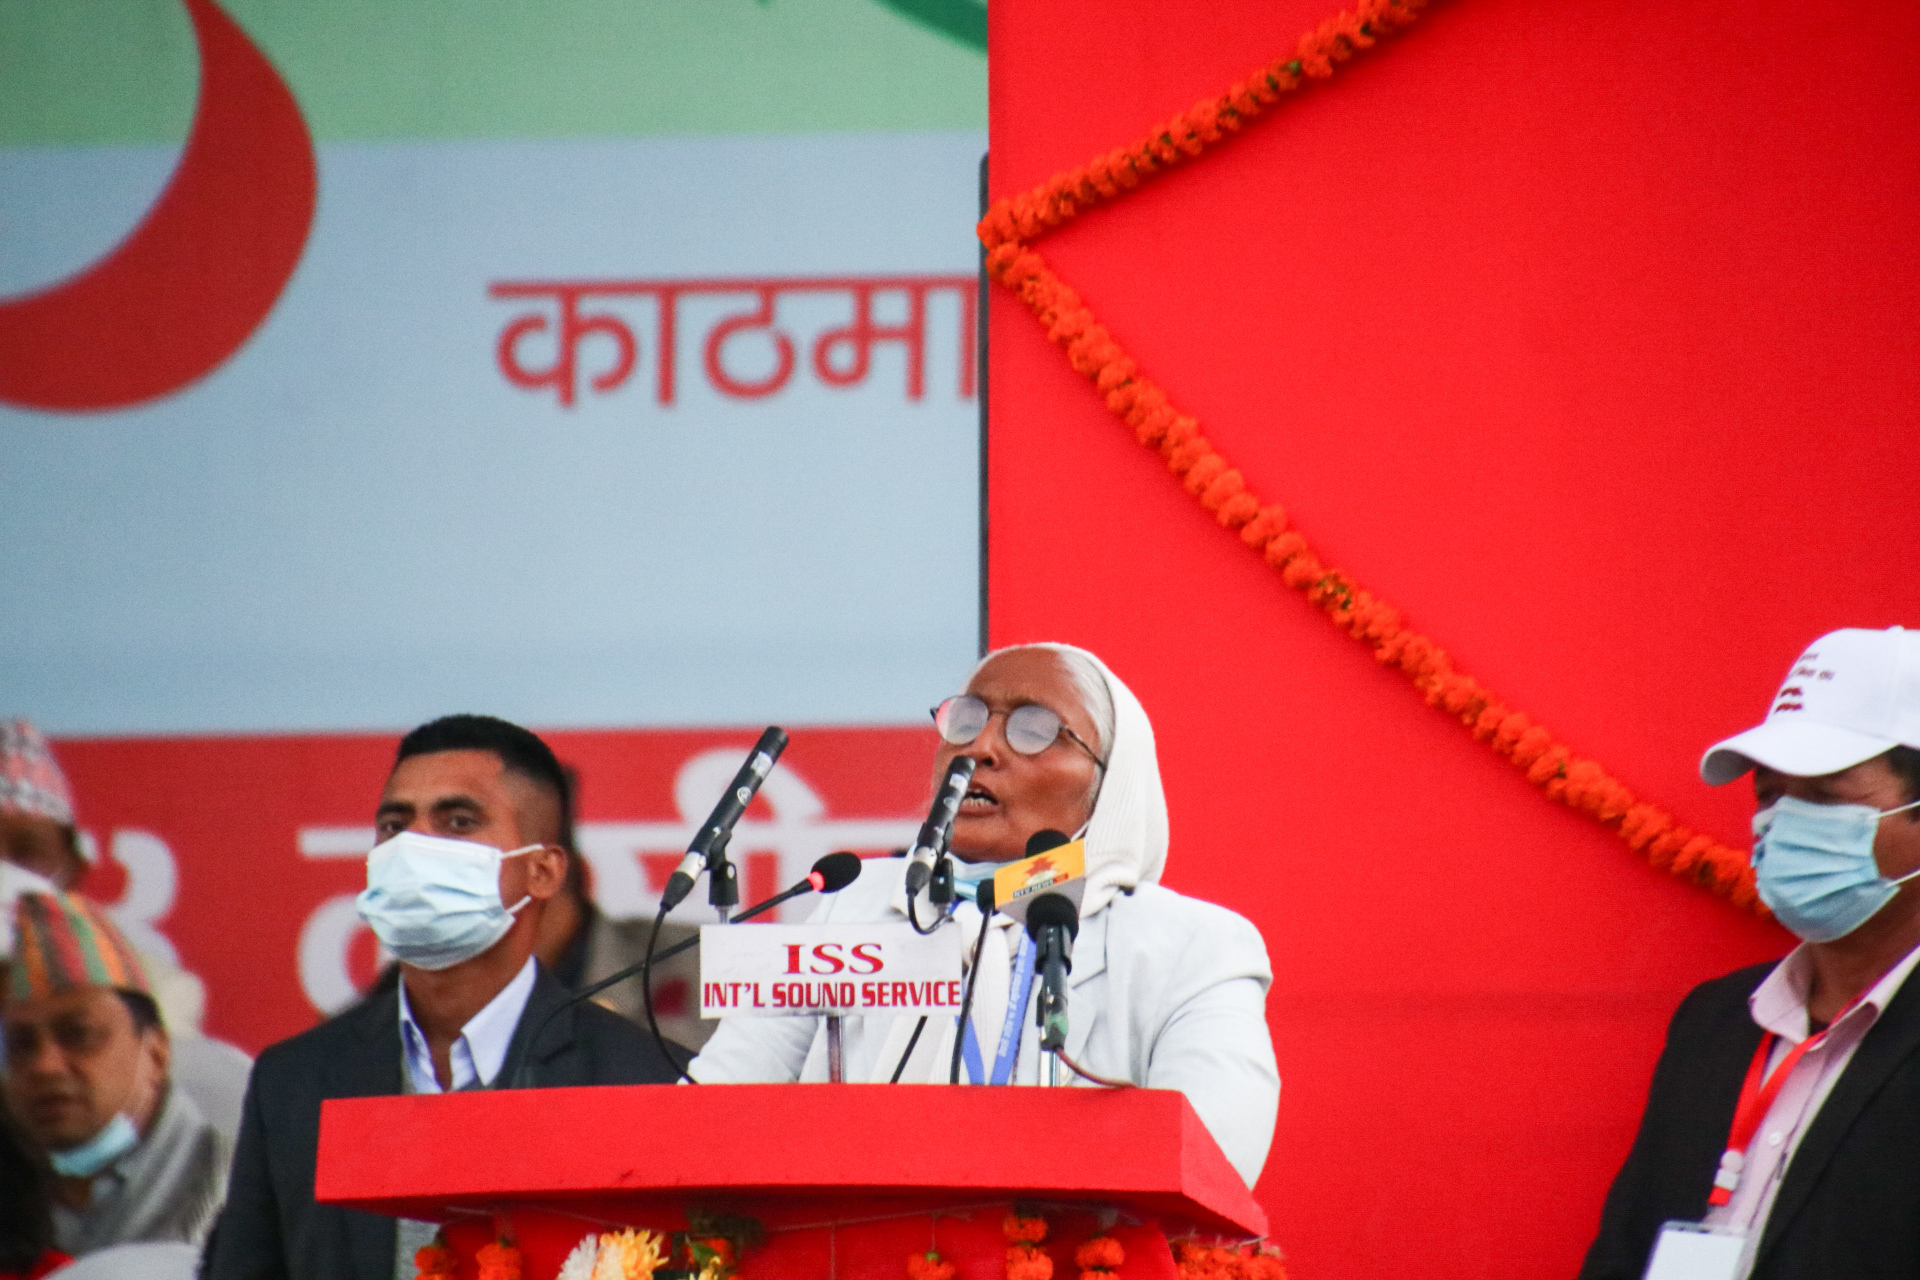 Leader Yadav says she won’t file candidacy in any of the posts